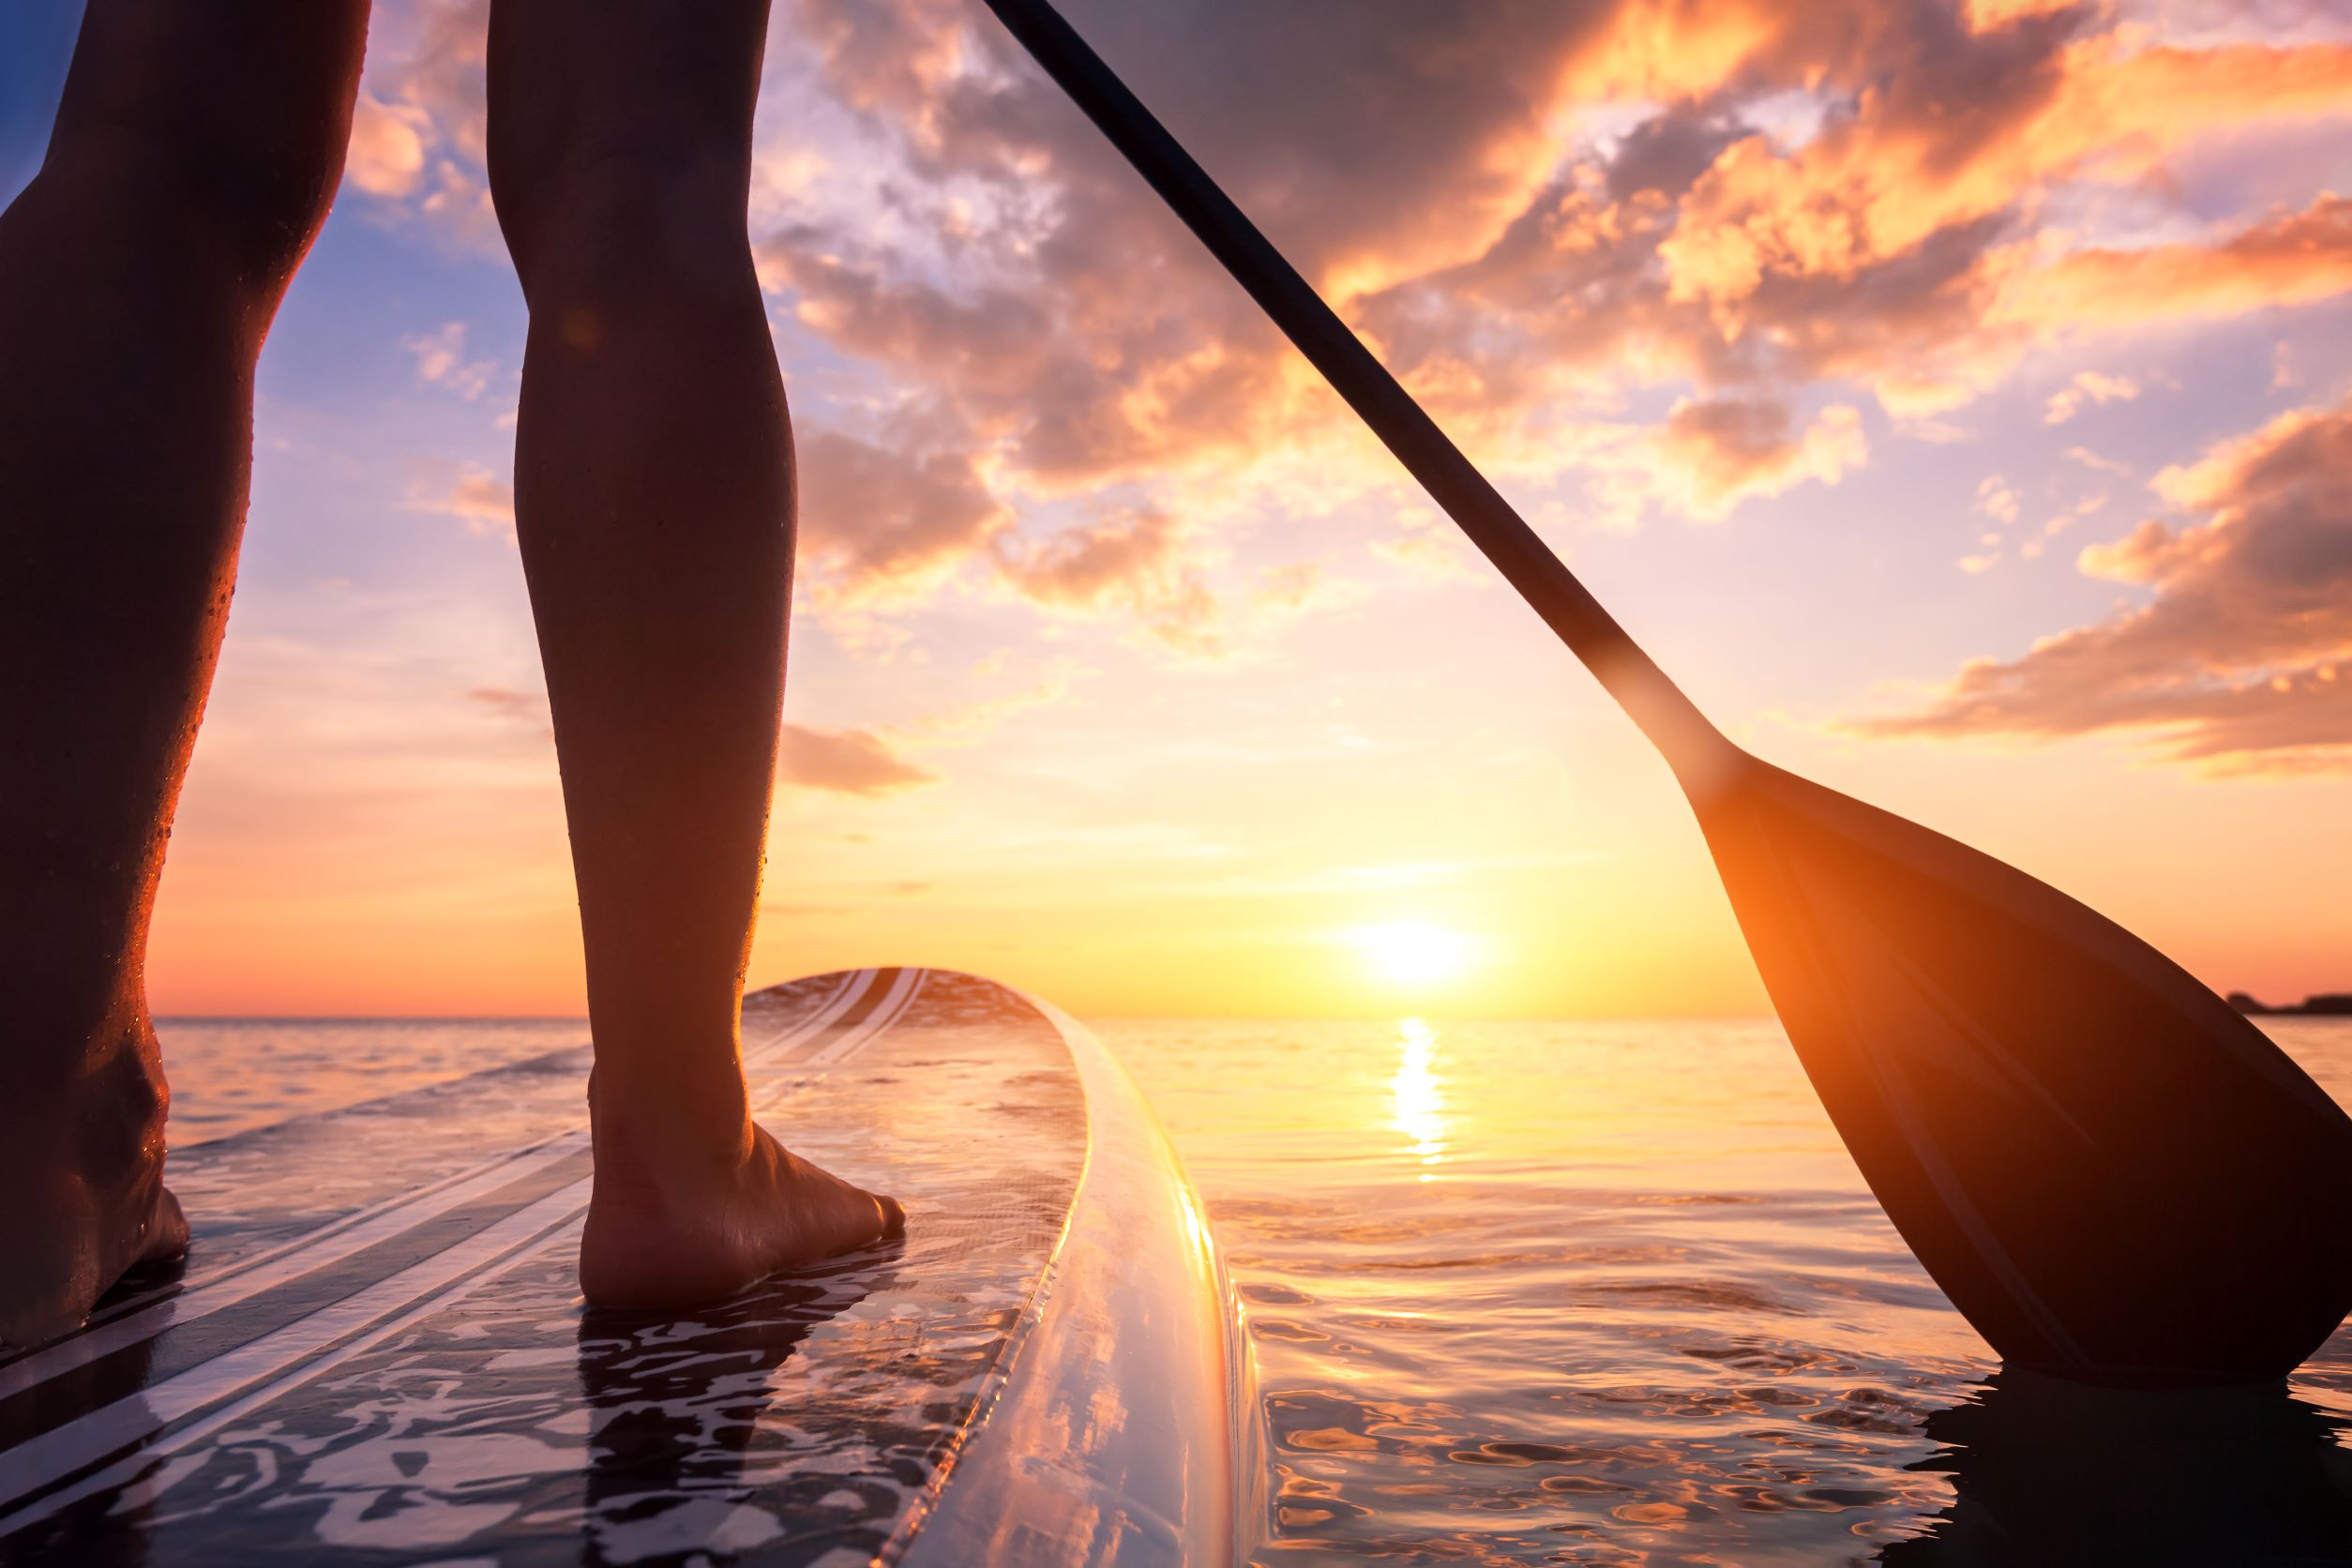 SUP paddle: How to choose?